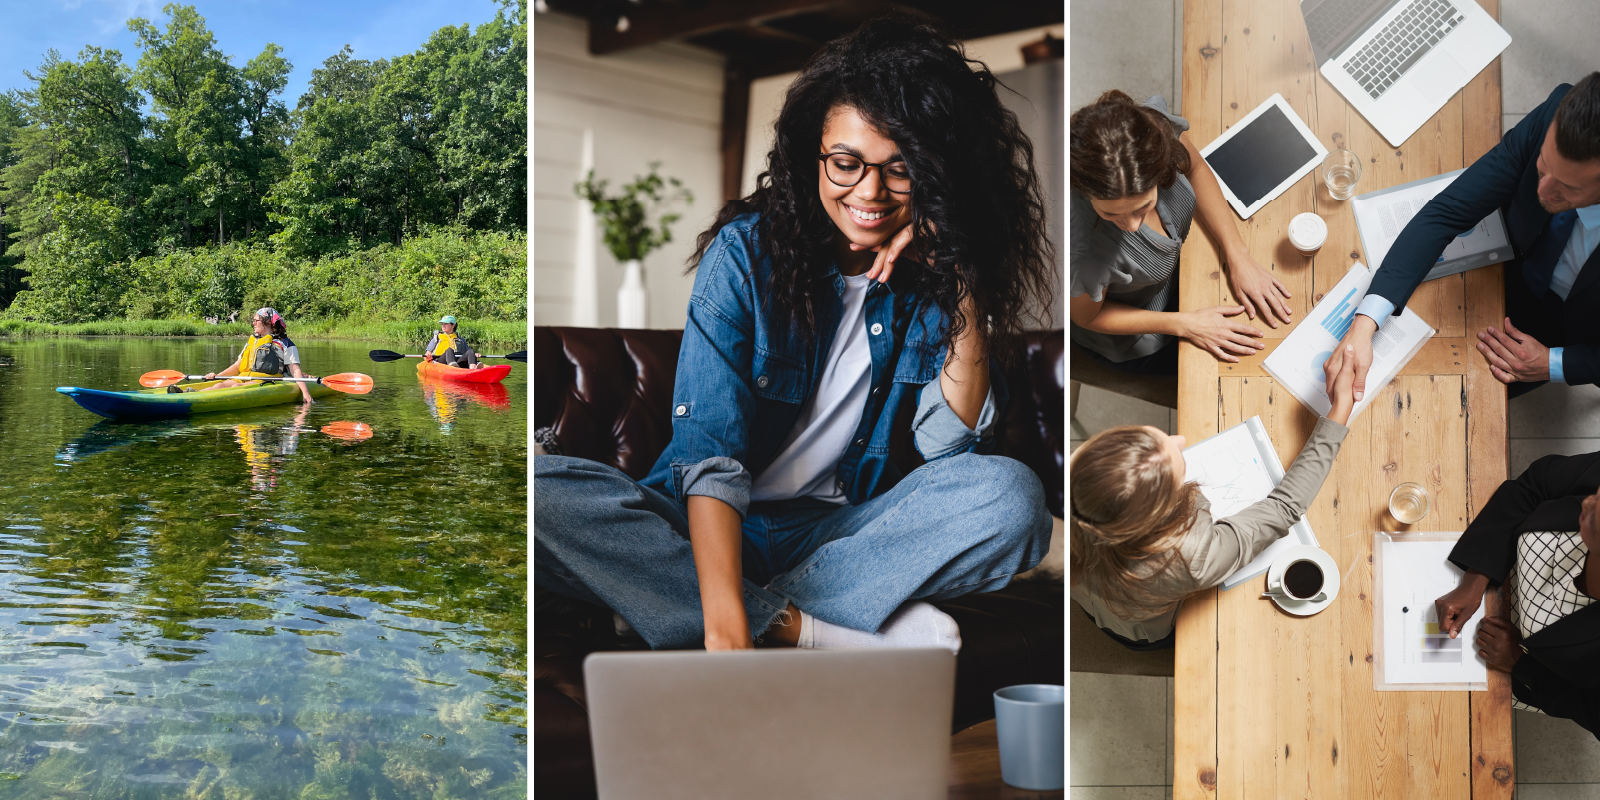 Three photos. From left to right: two people kayaking in Missouri, a girl smiling while studying on her computer, and an overhead shot of four people at a business meeting, the two people on opposite sides of the table are shaking hands.